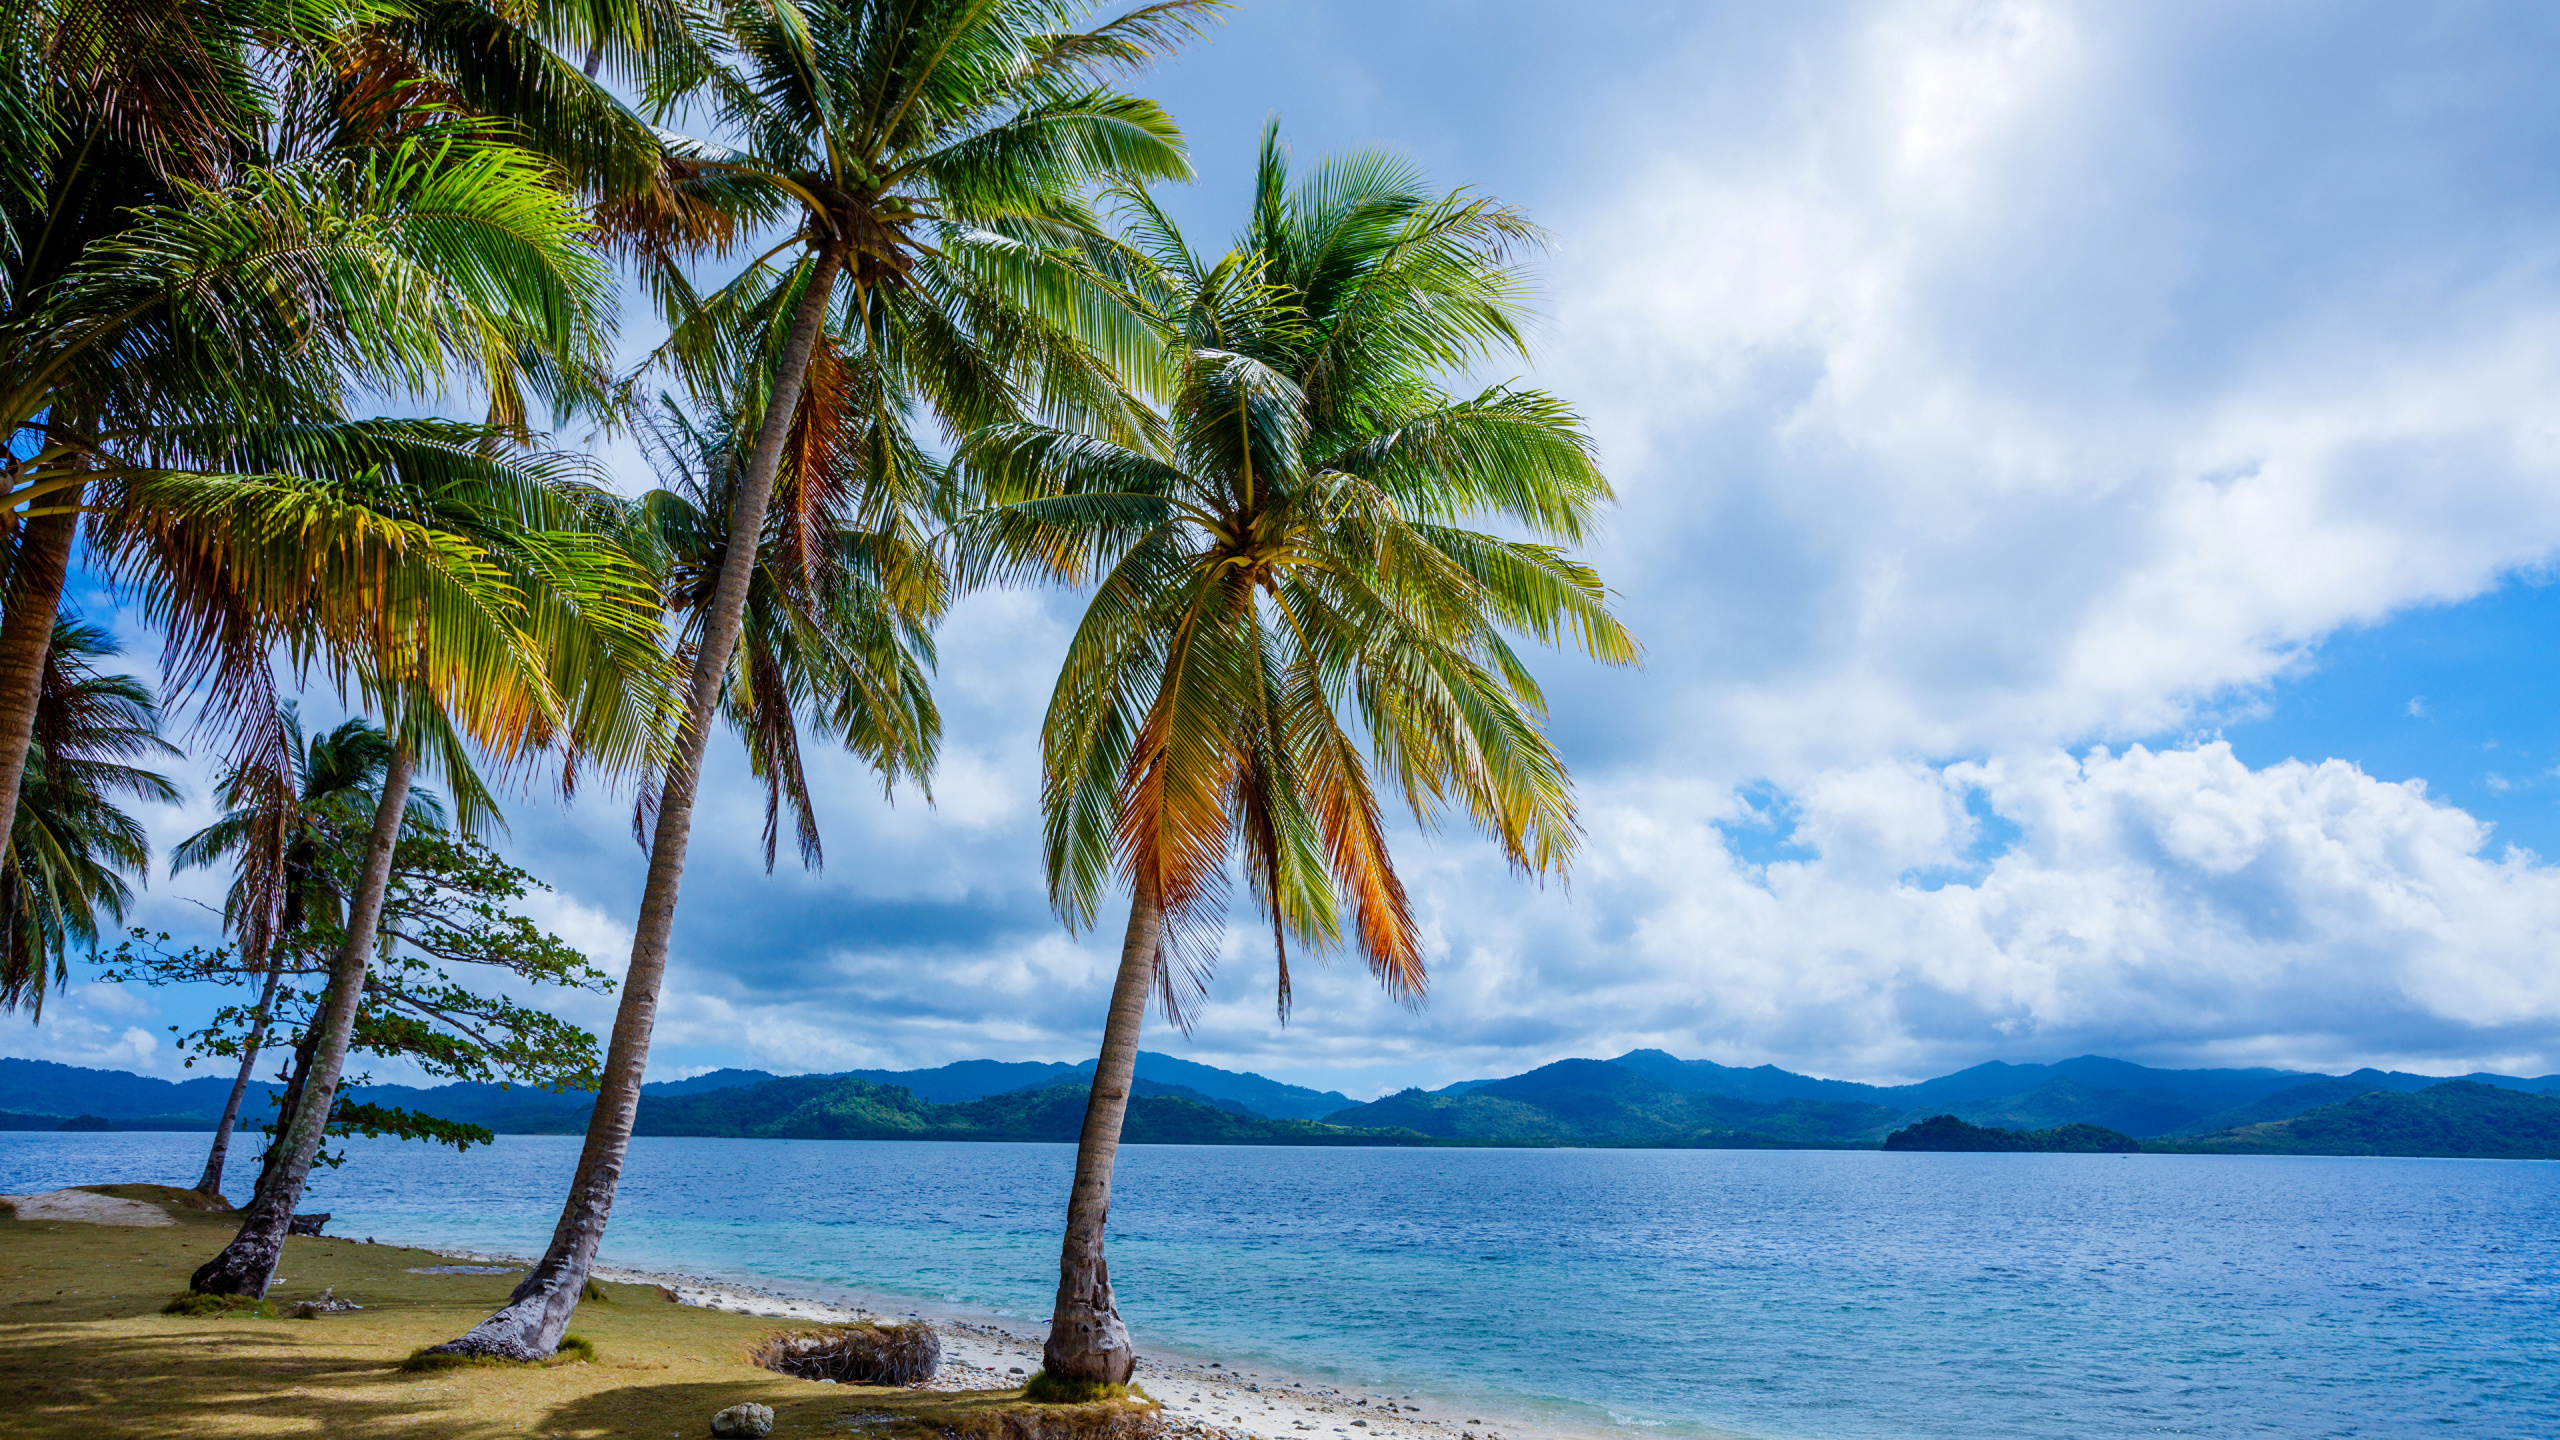 Coconut Tree Near Sea Under White Clouds and Blue Sky During Daytime. Wallpaper in 2560x1440 Resolution